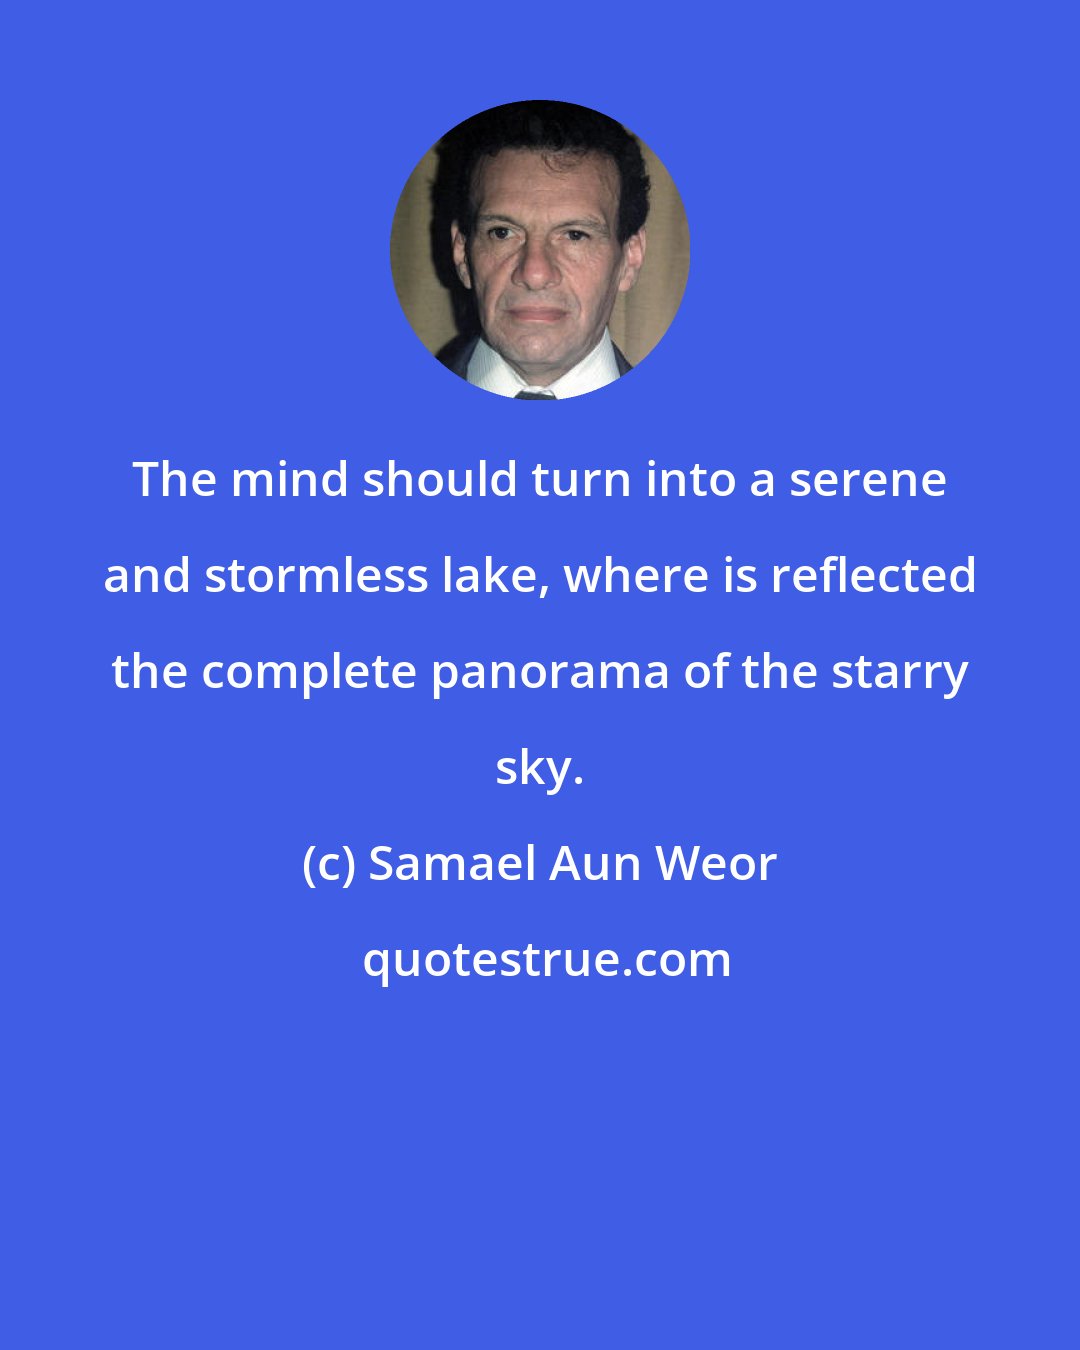 Samael Aun Weor: The mind should turn into a serene and stormless lake, where is reflected the complete panorama of the starry sky.